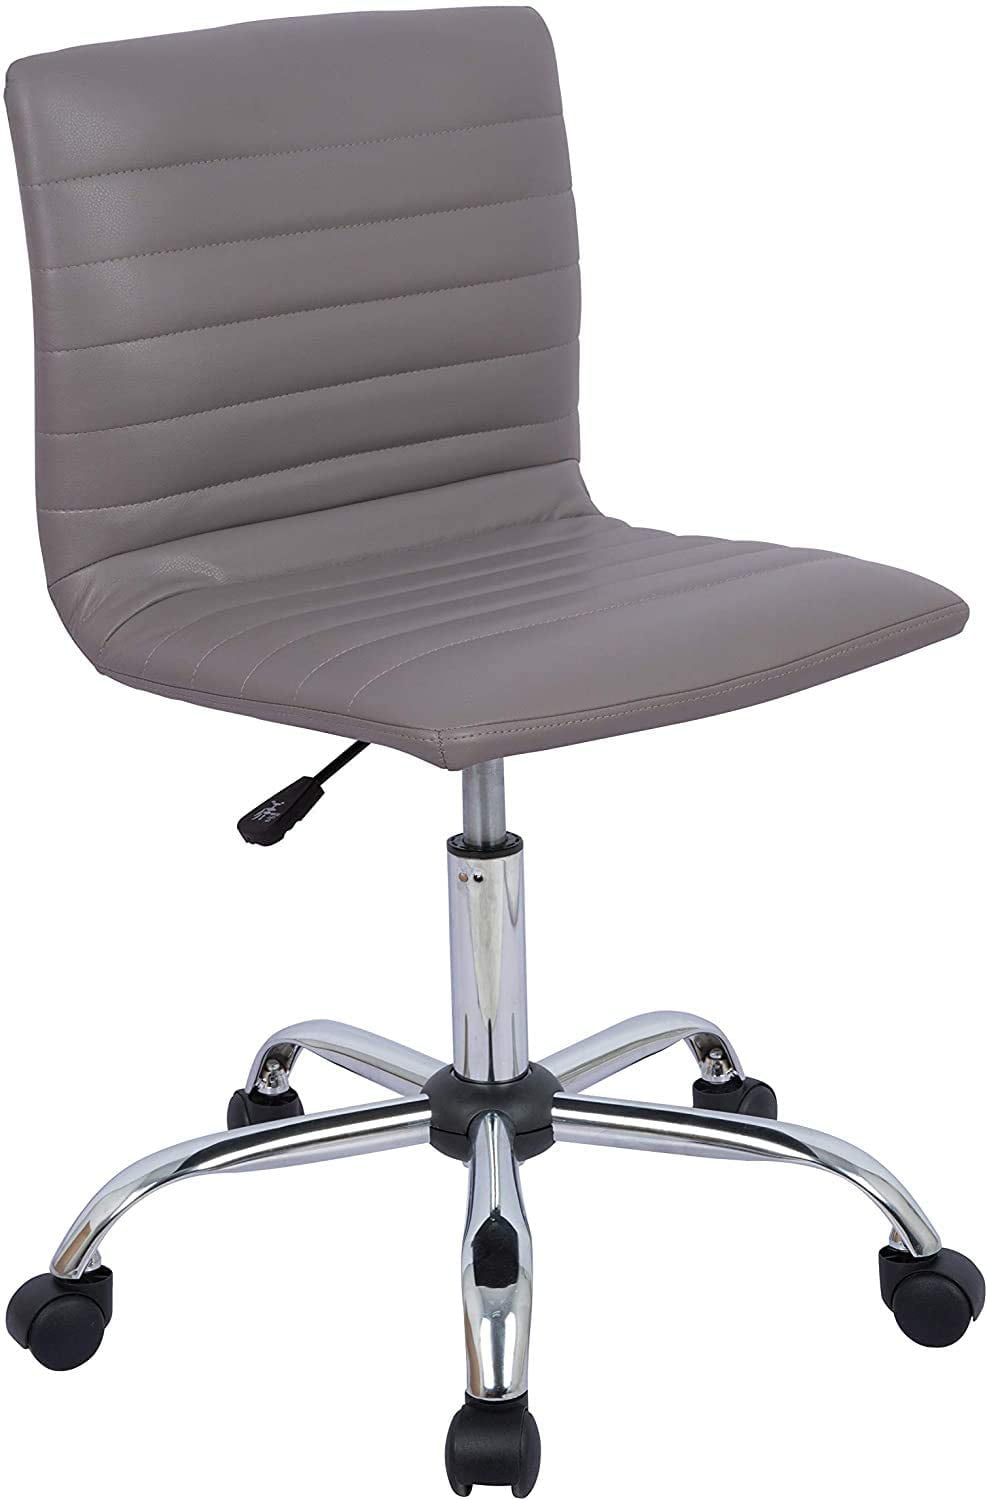 Home Office Chair White Computer Chair Adjustable Height Ribbed Low Back Armless Swivel Conference Room Task Desk Chairs